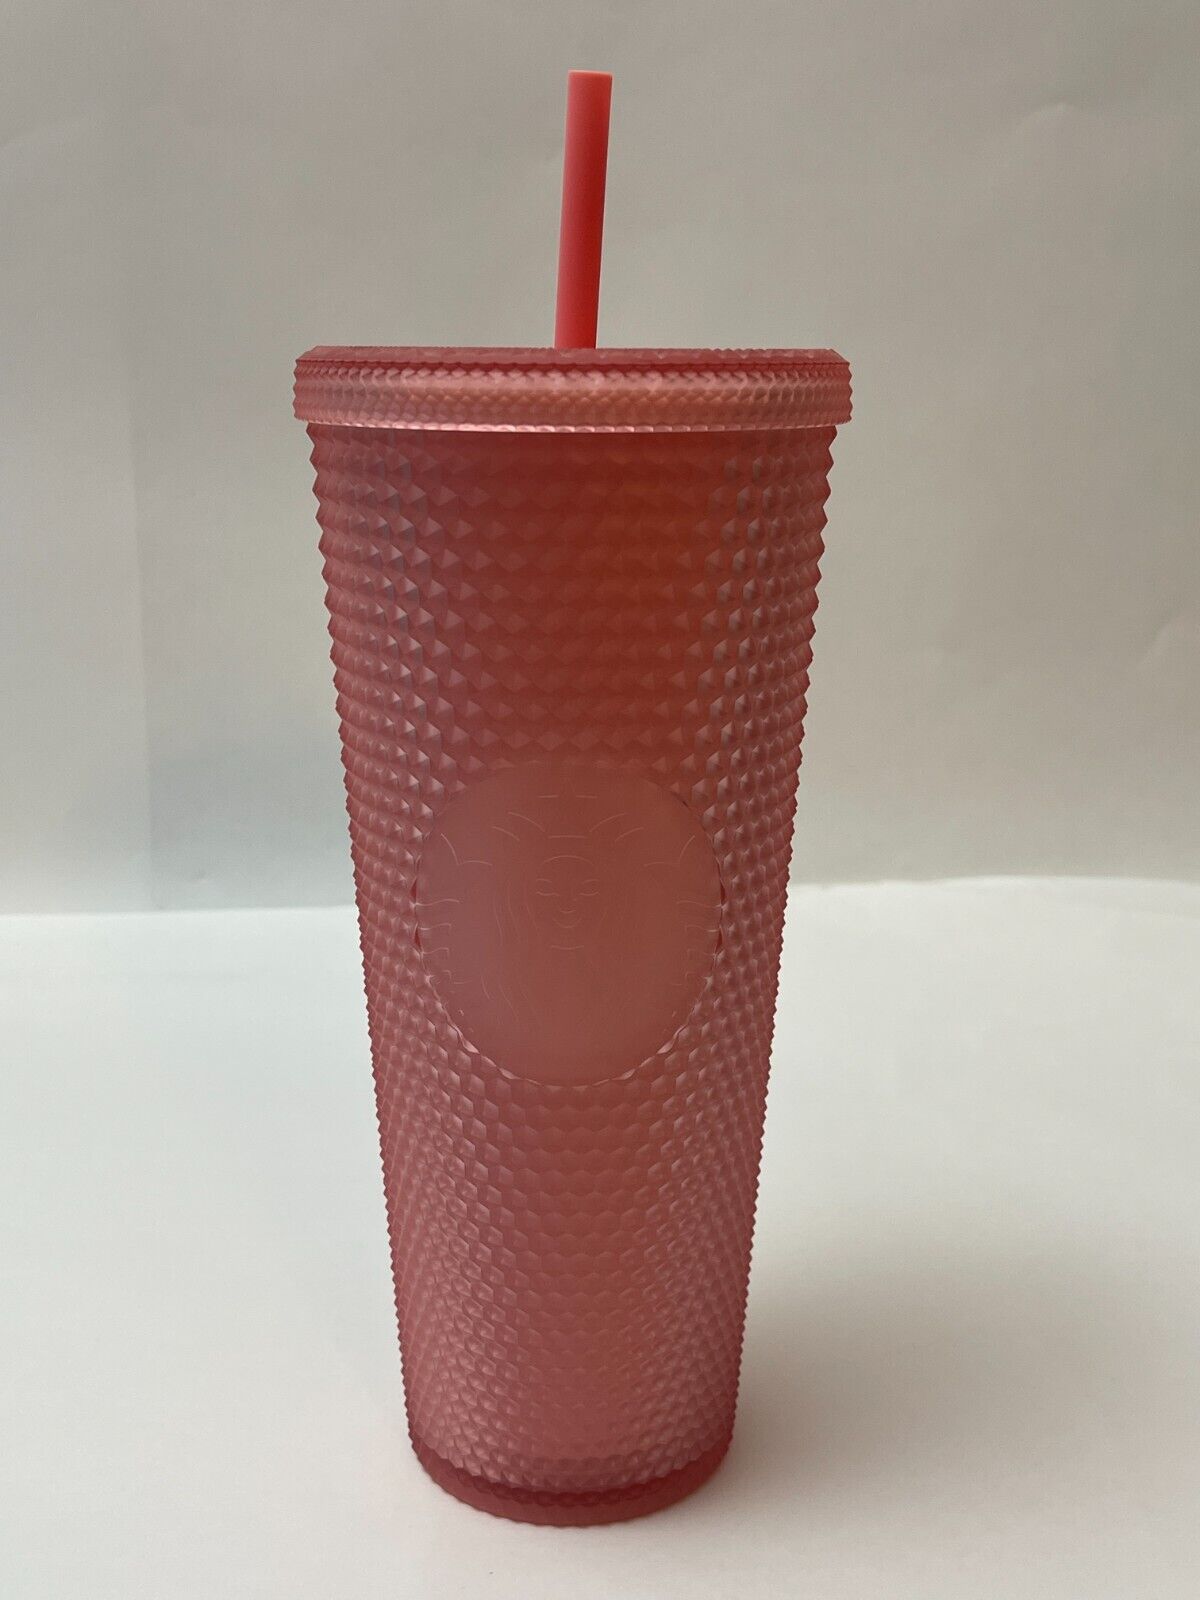 NEW Starbucks Soft Touch Pink Lemonade Studded 24 oz Travel Tumbler Cold Cup